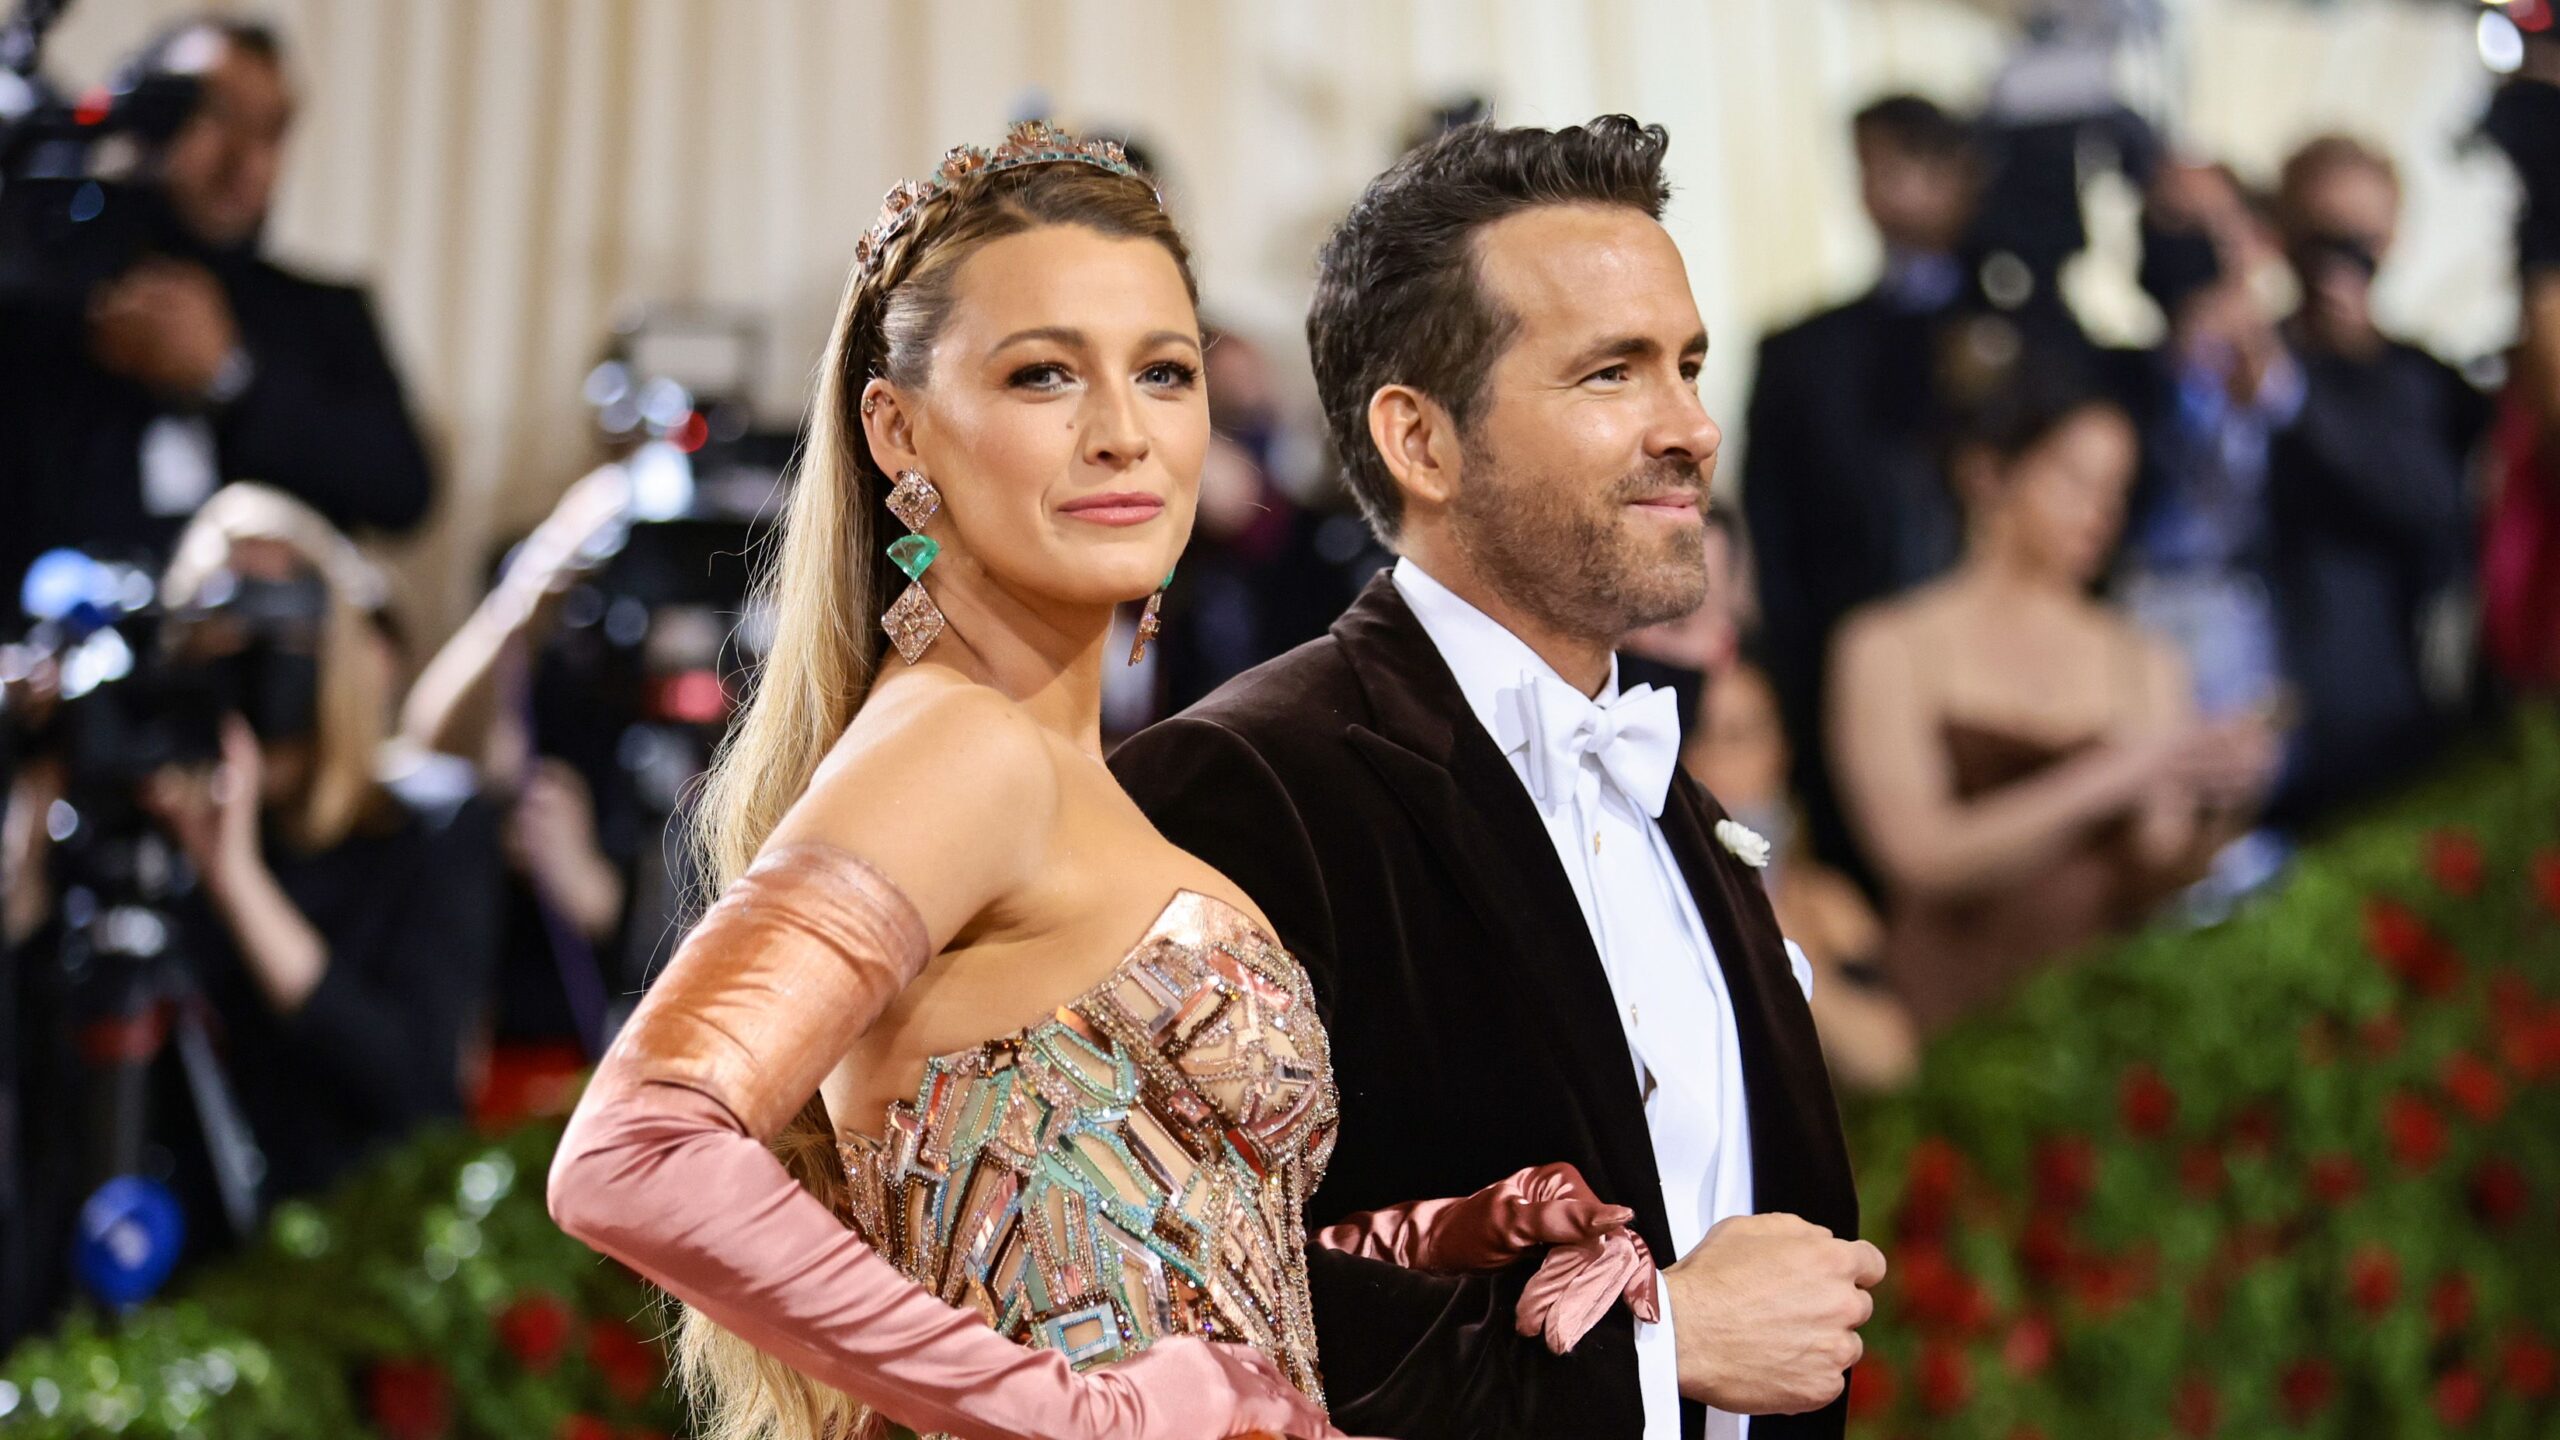 Blake Lively: The Star Wife Who Shines on Her Own